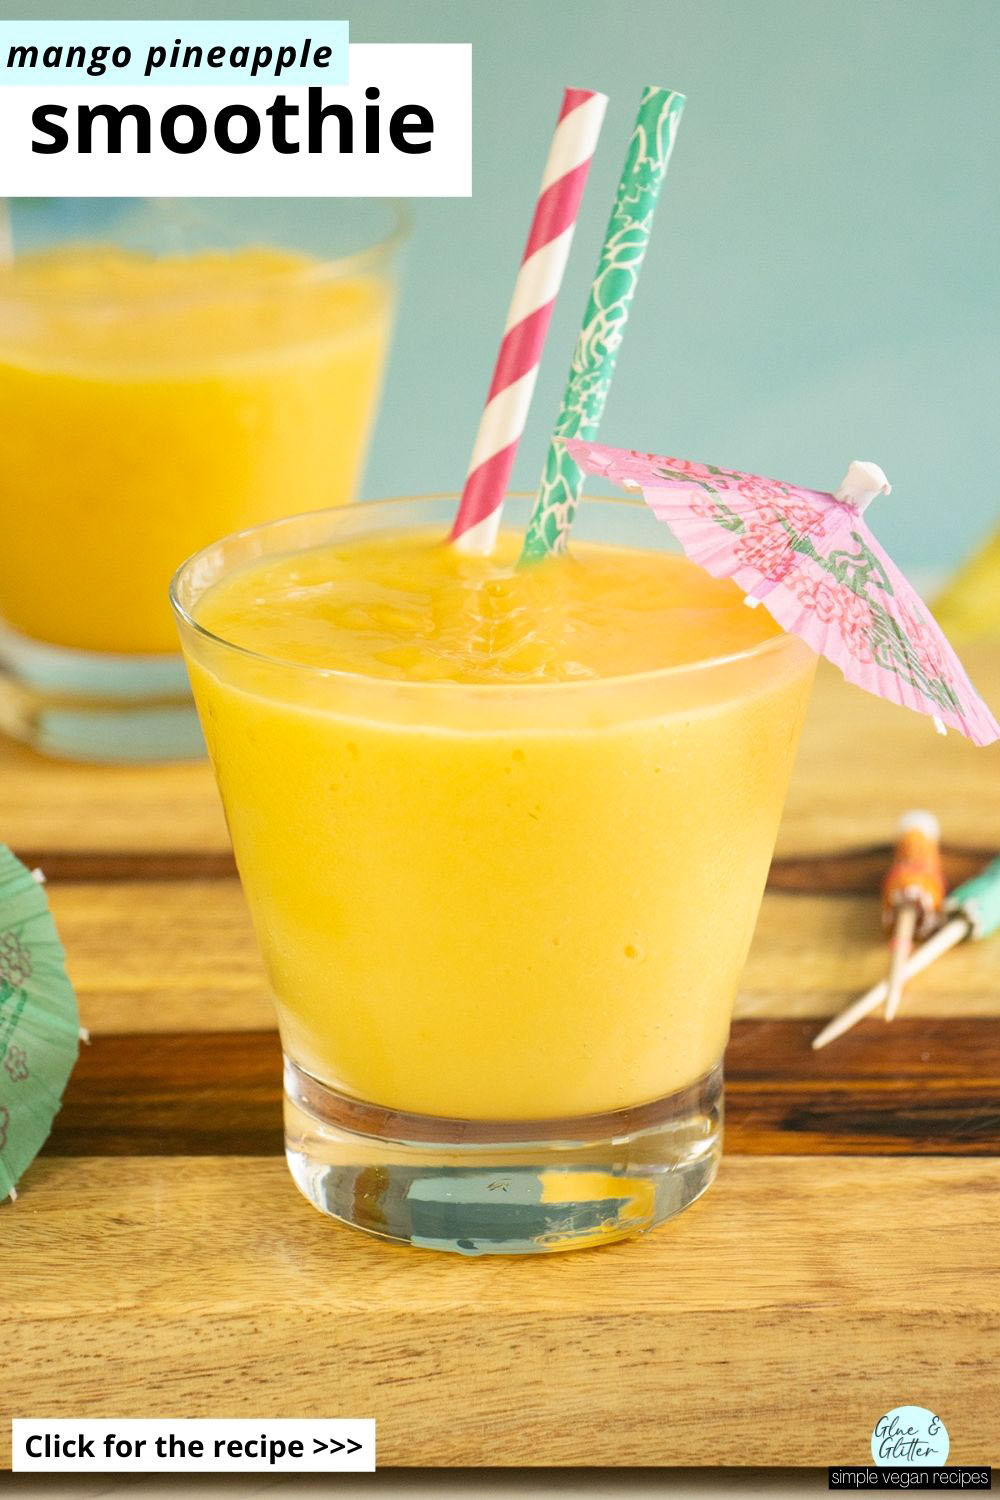 mango pineapple smoothies with umbrellas and straws in them on a wooden countertop, text overlay